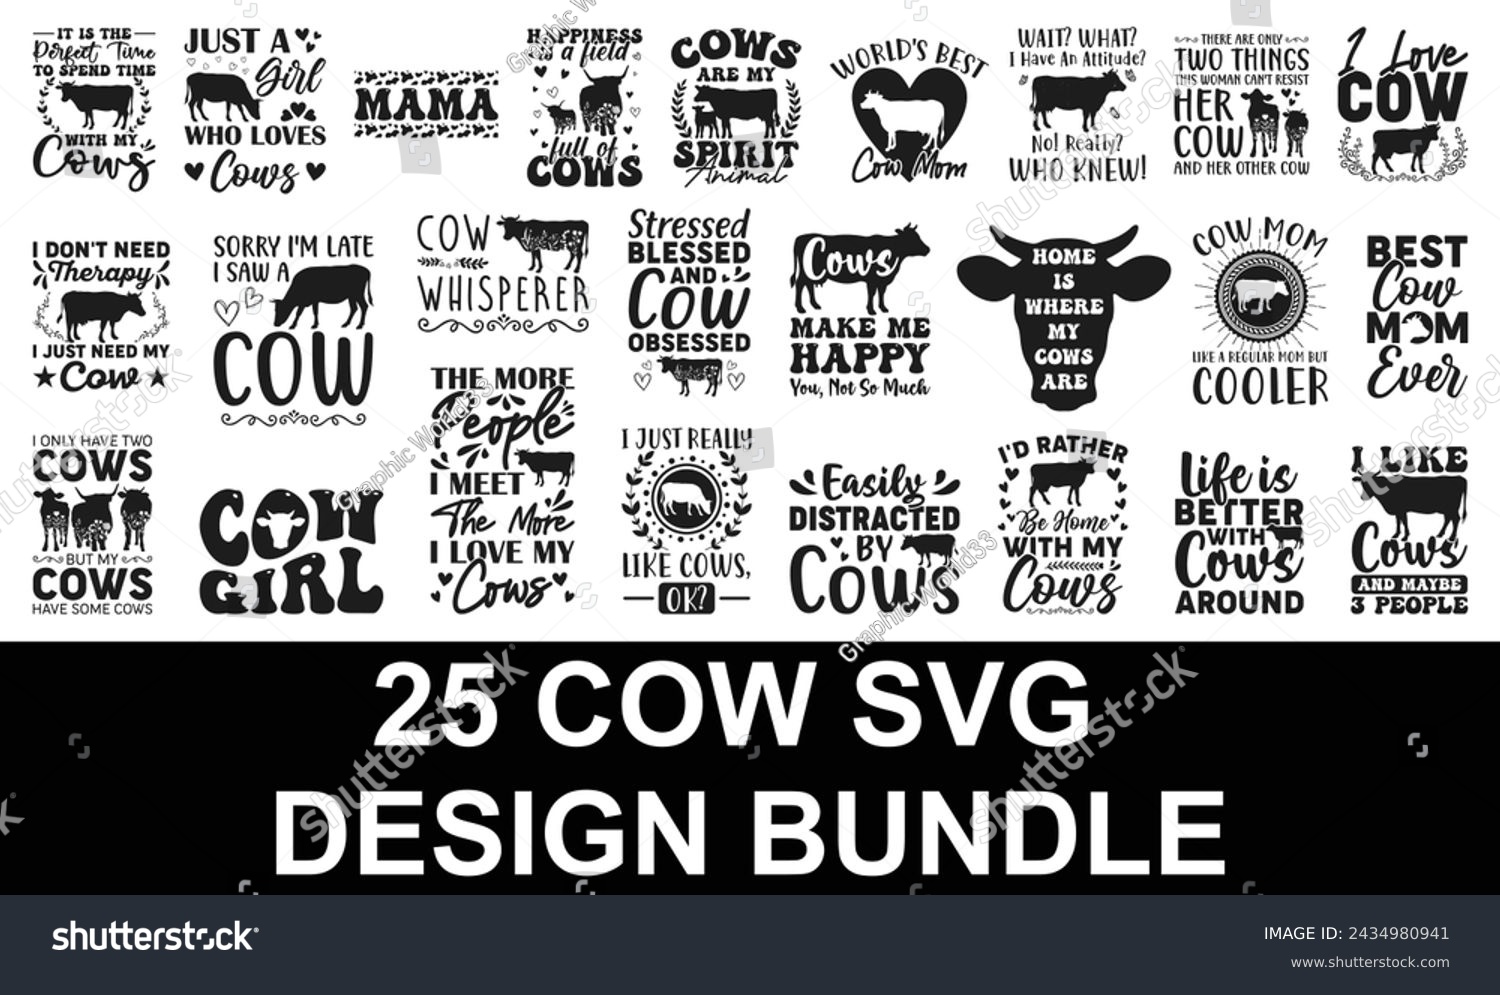 SVG of Cow design bundle, Quotes designs vector, Typography t shirt Print Template svg